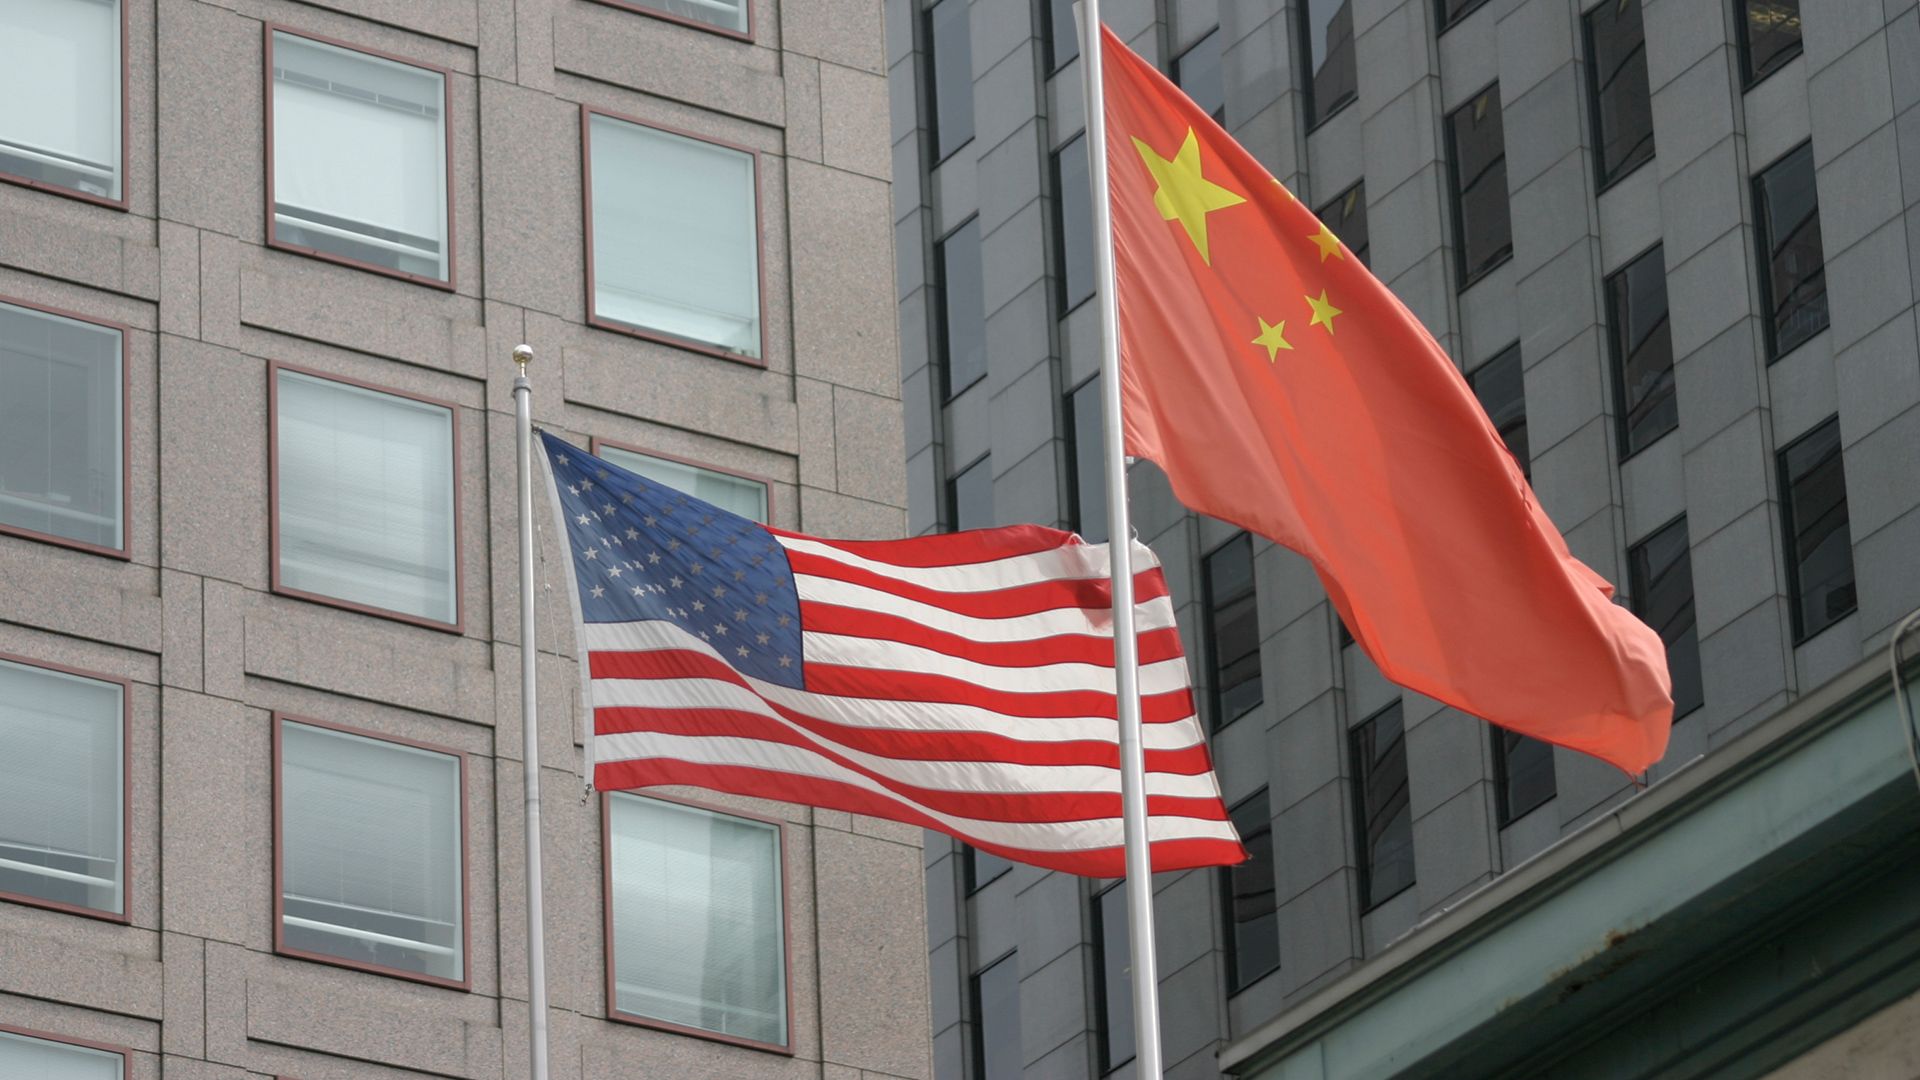 Chinese and American flags flying in front of buildings